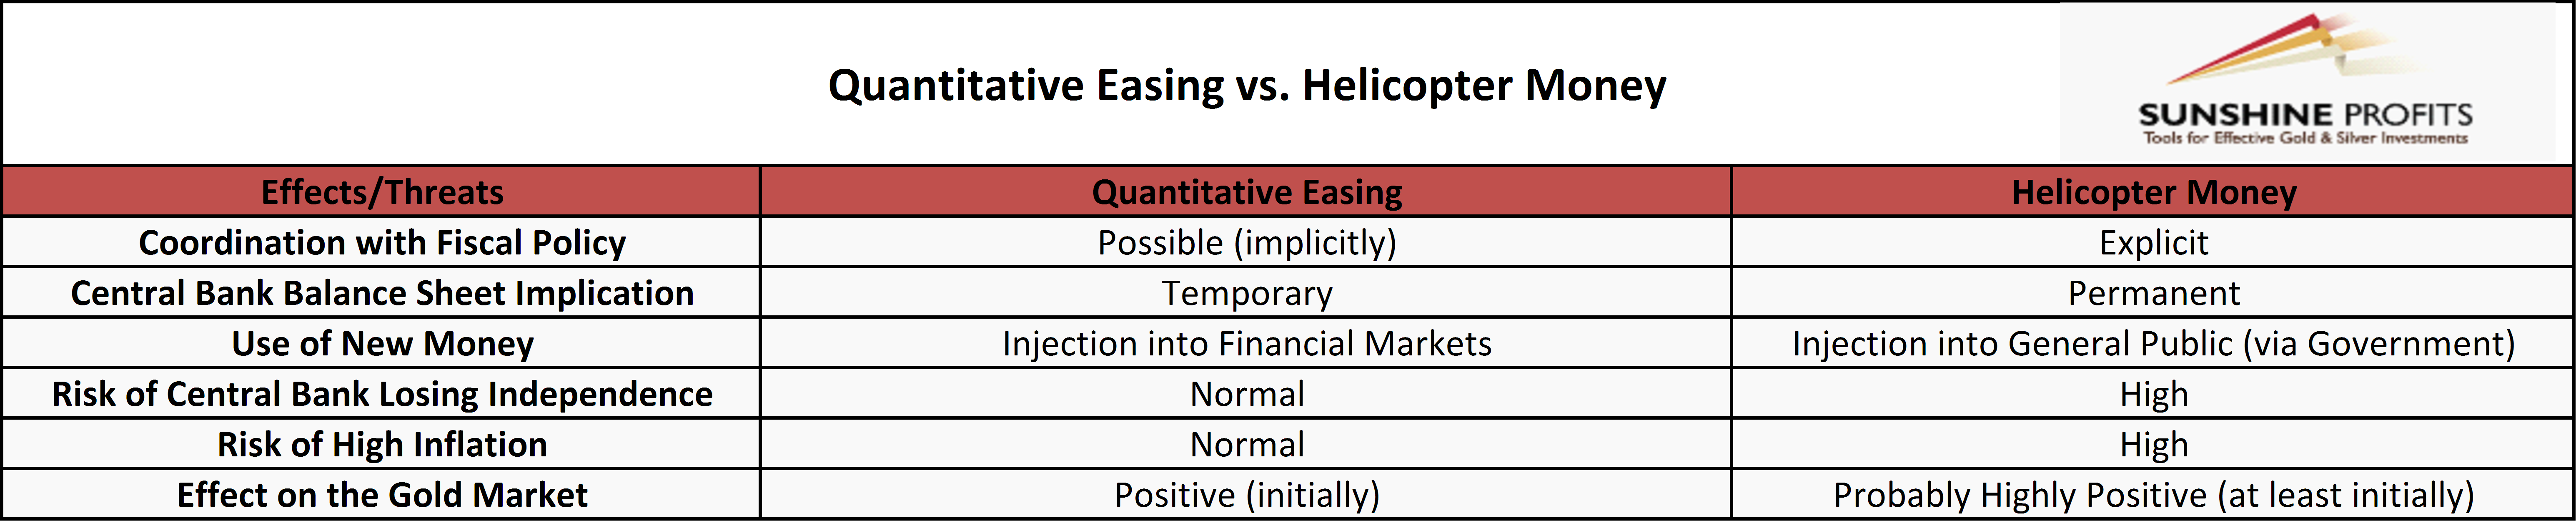 Helicopter Money Comparison